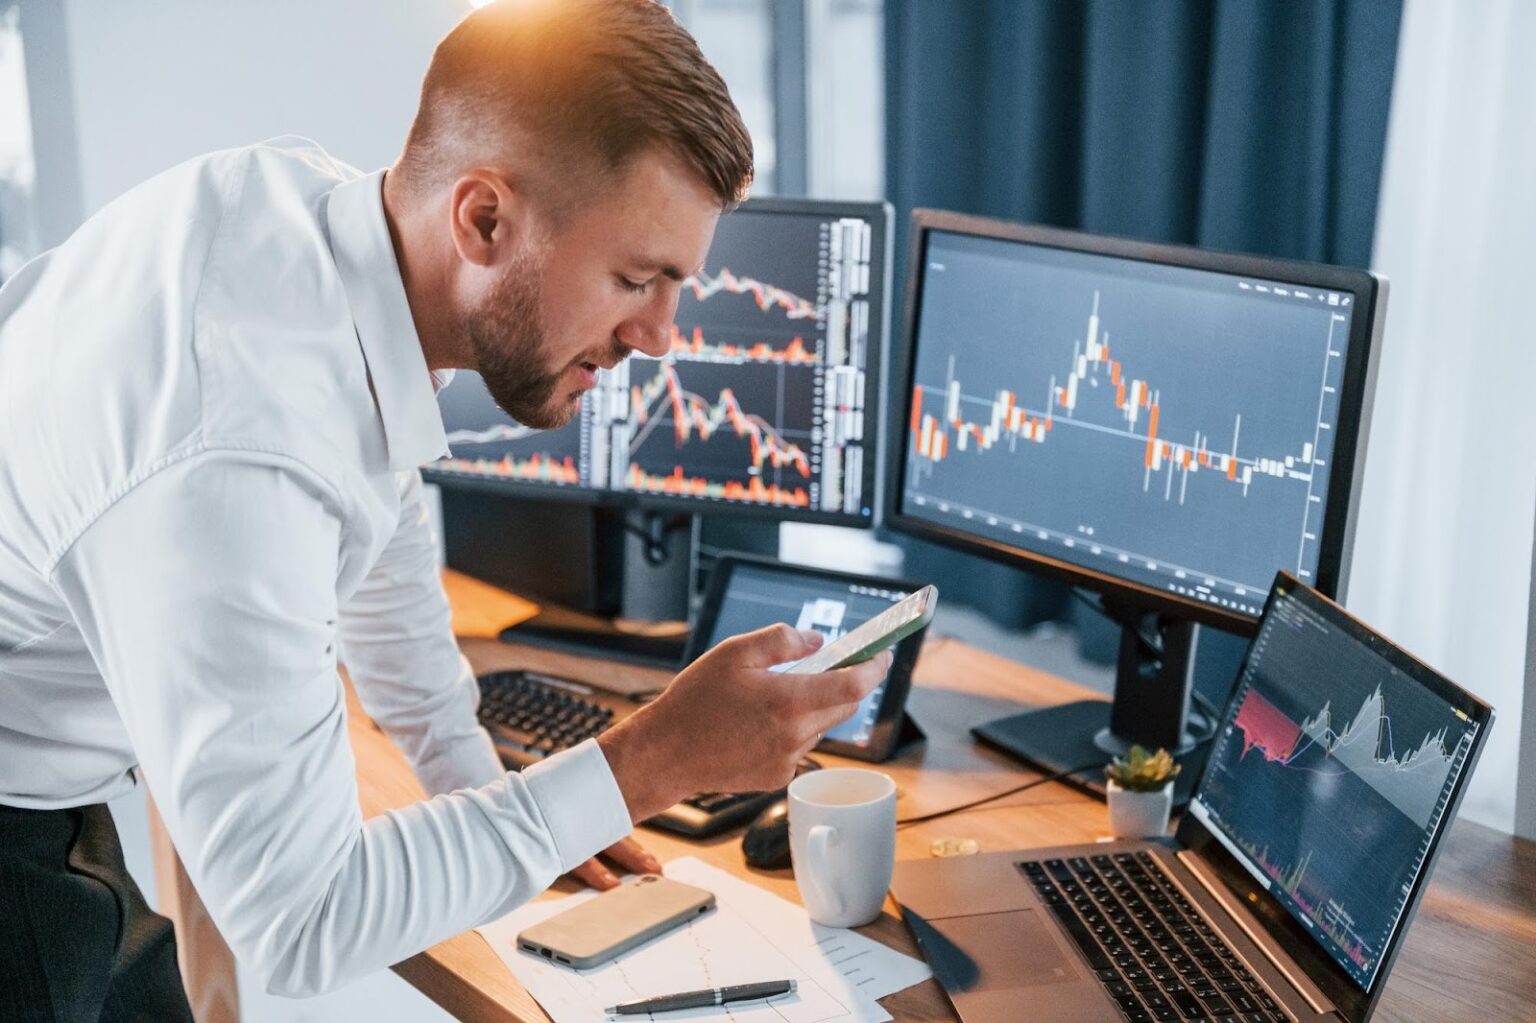 Traders Union released a list of the best Forex brokers for 2023